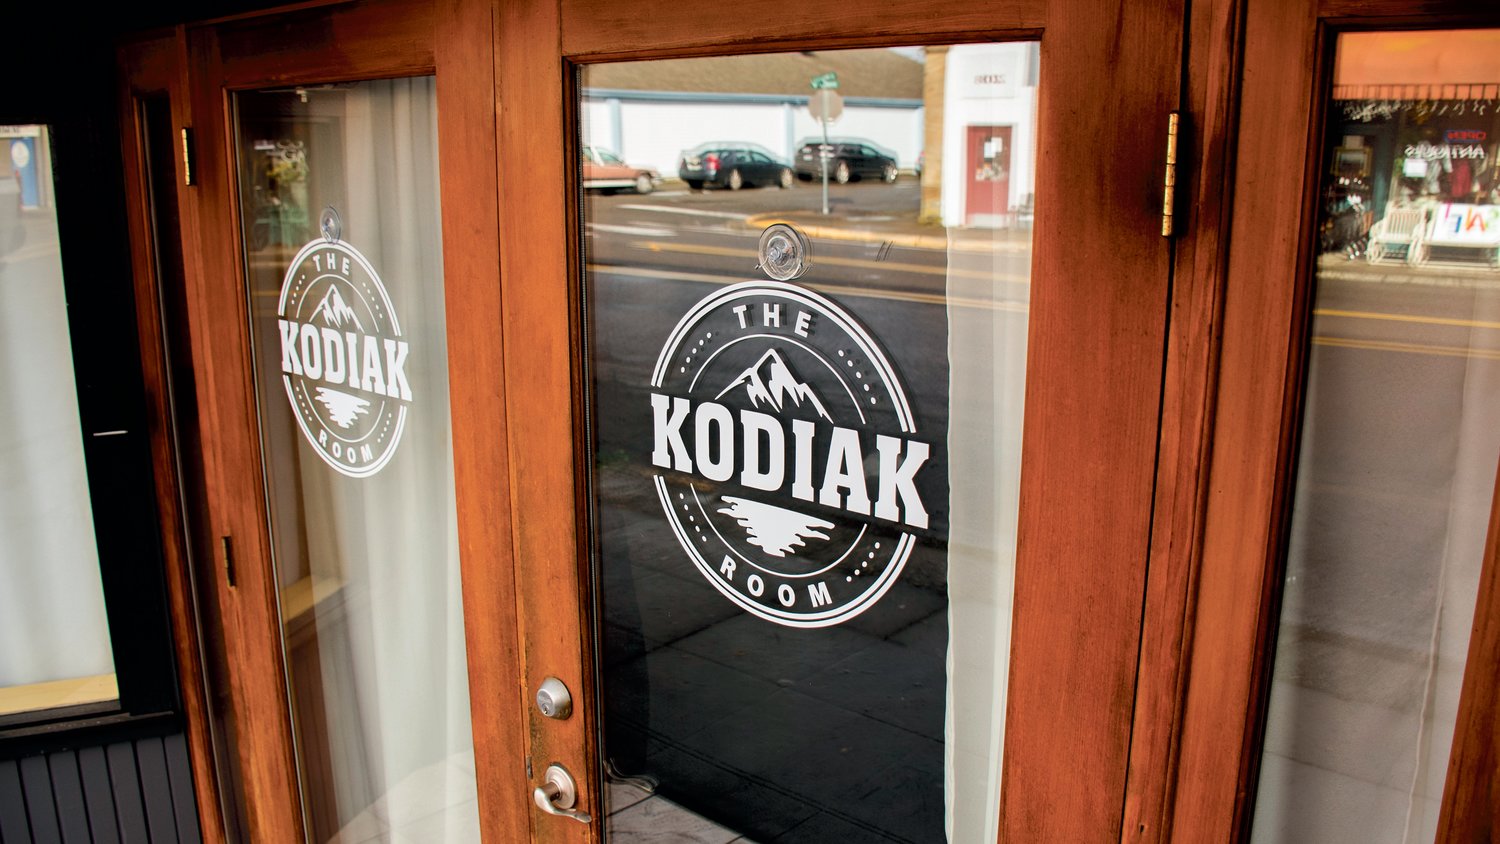 The Kodiak Room is located at 225 Sussex Avenue West in Tenino.